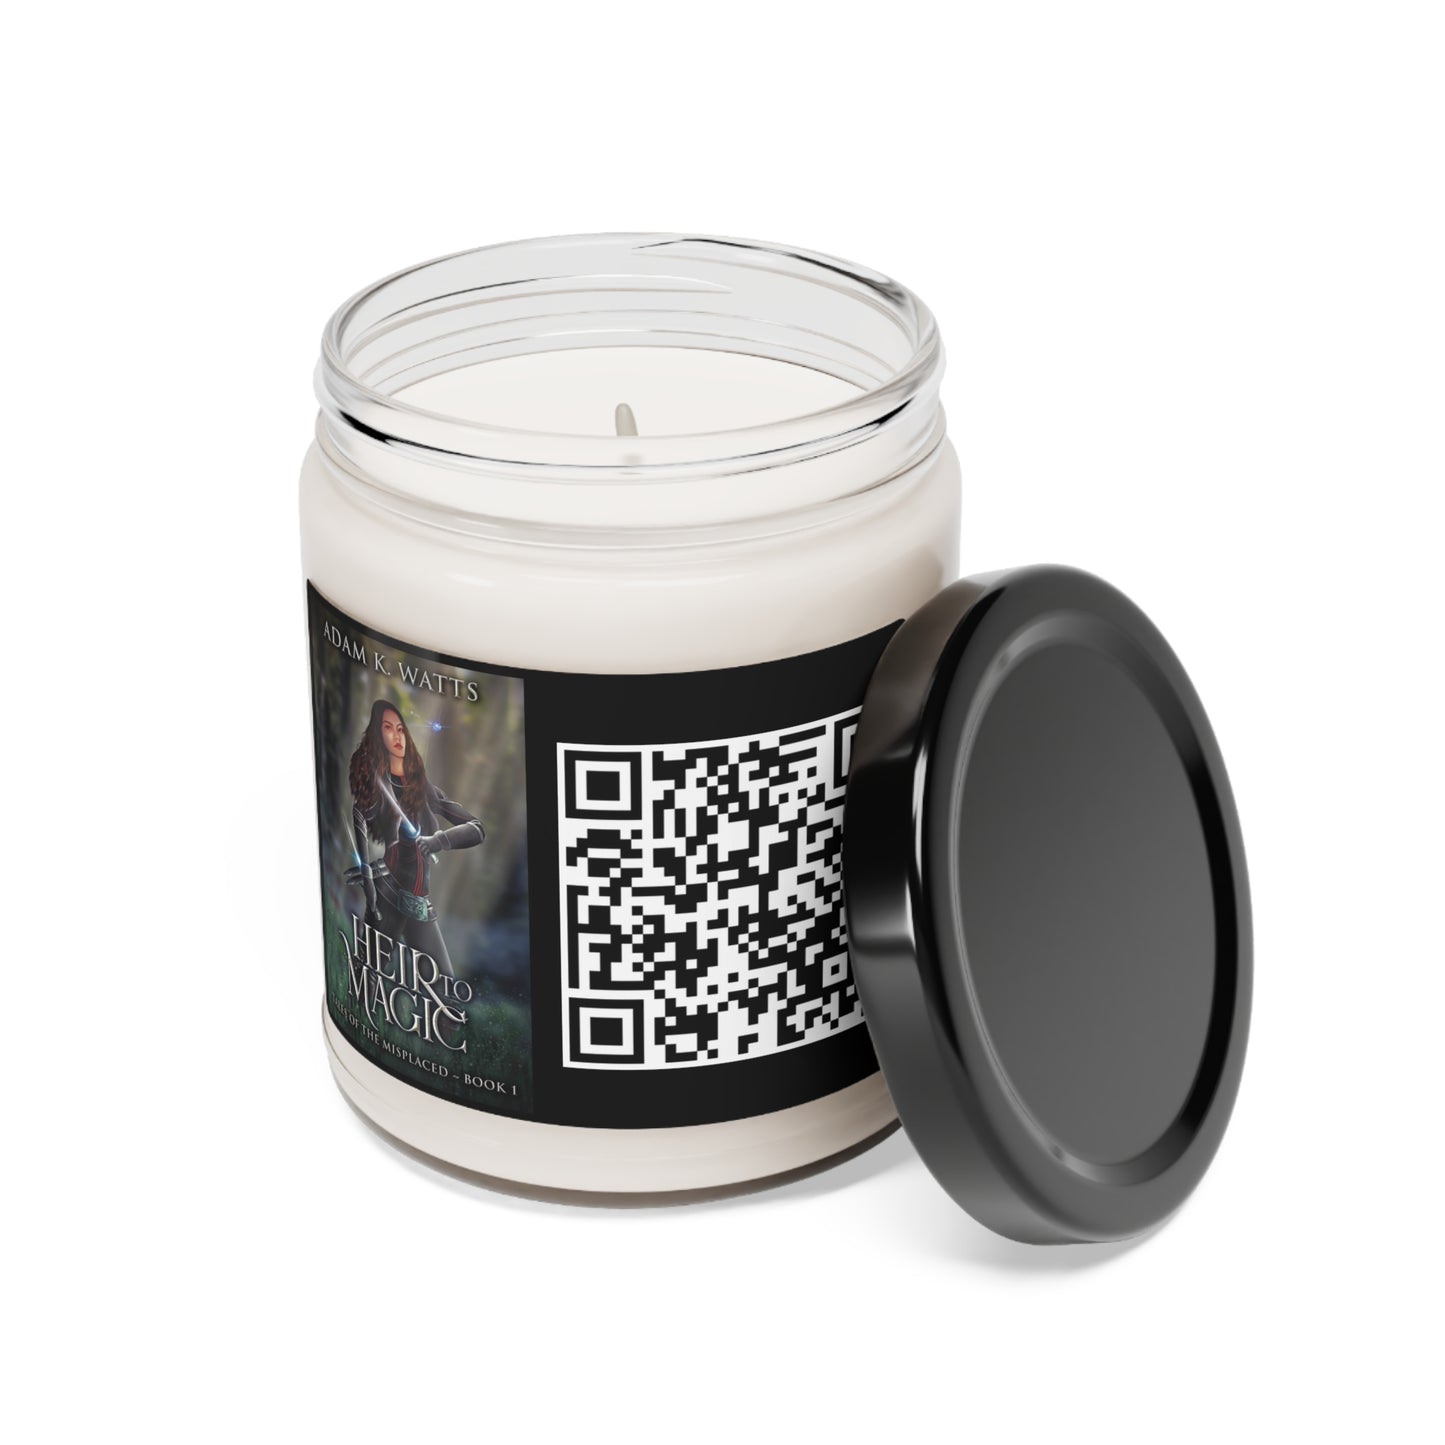 Heir To Magic - Scented Soy Candle